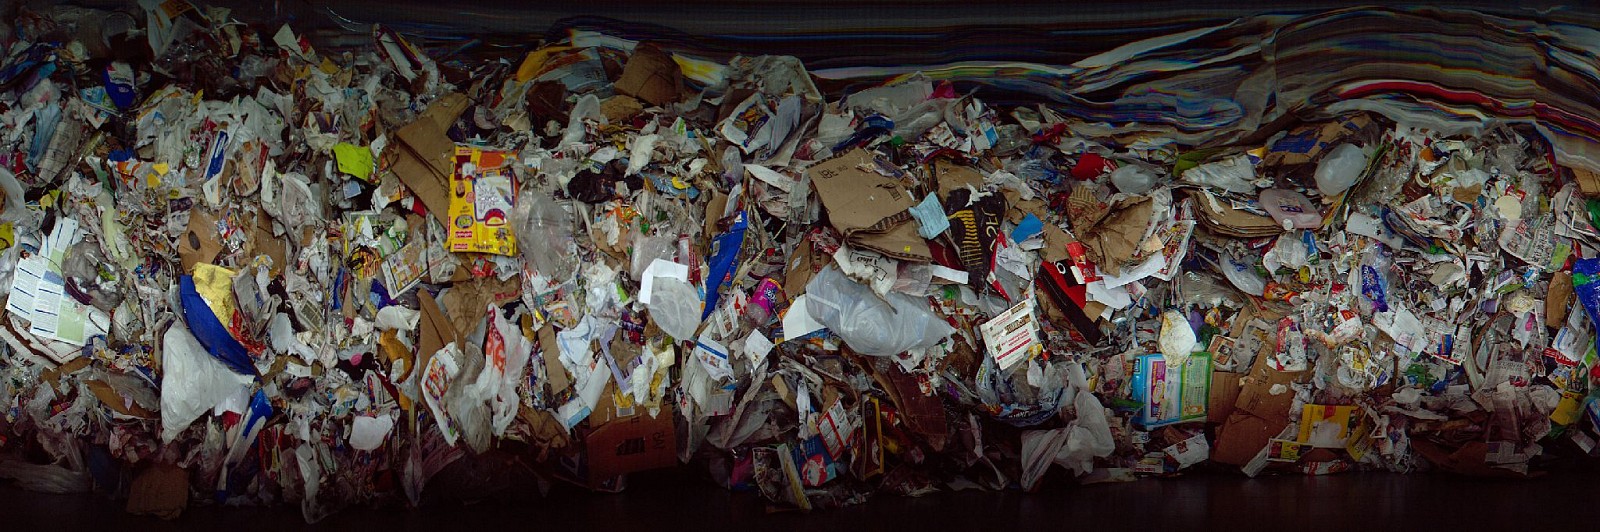 Jay Mark Johnson, WASTE NOT WHATNOT #3, 2013 Freemont Garbage
archival pigment on paper, mounted on aluminum, 40 x 120 in. (101.6 x 304.8 cm)